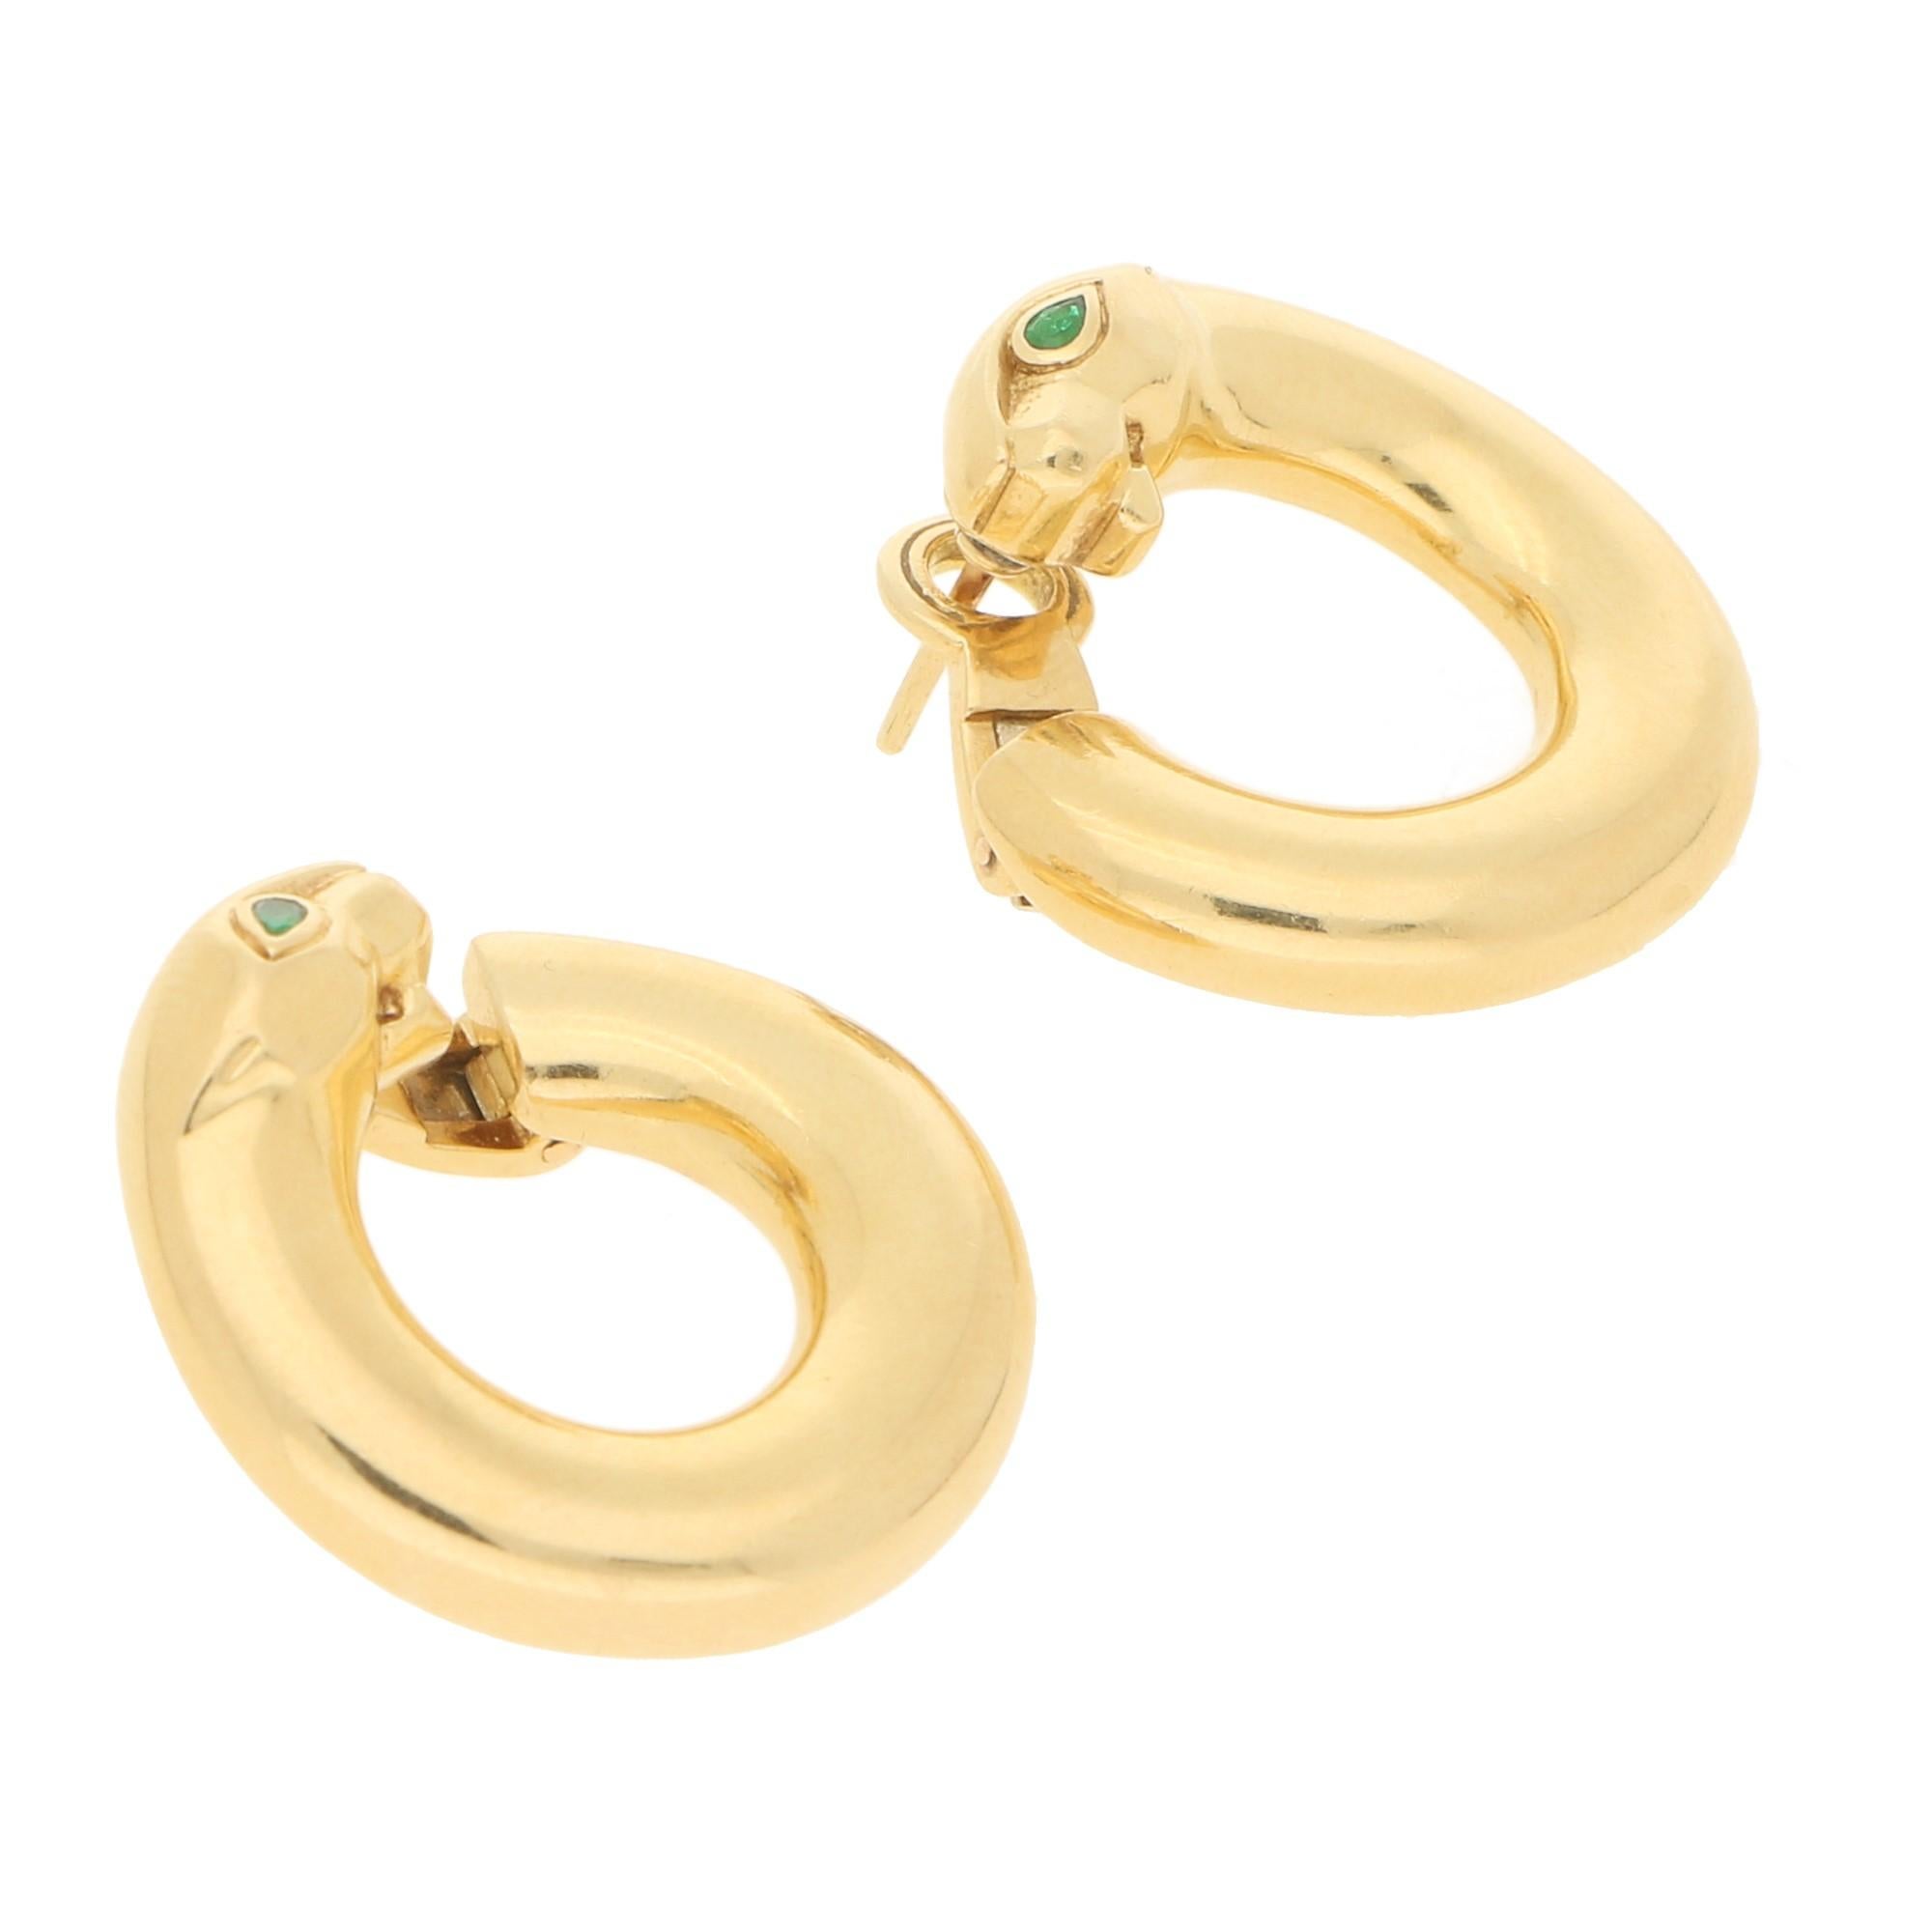 vintage cartier panther earrings